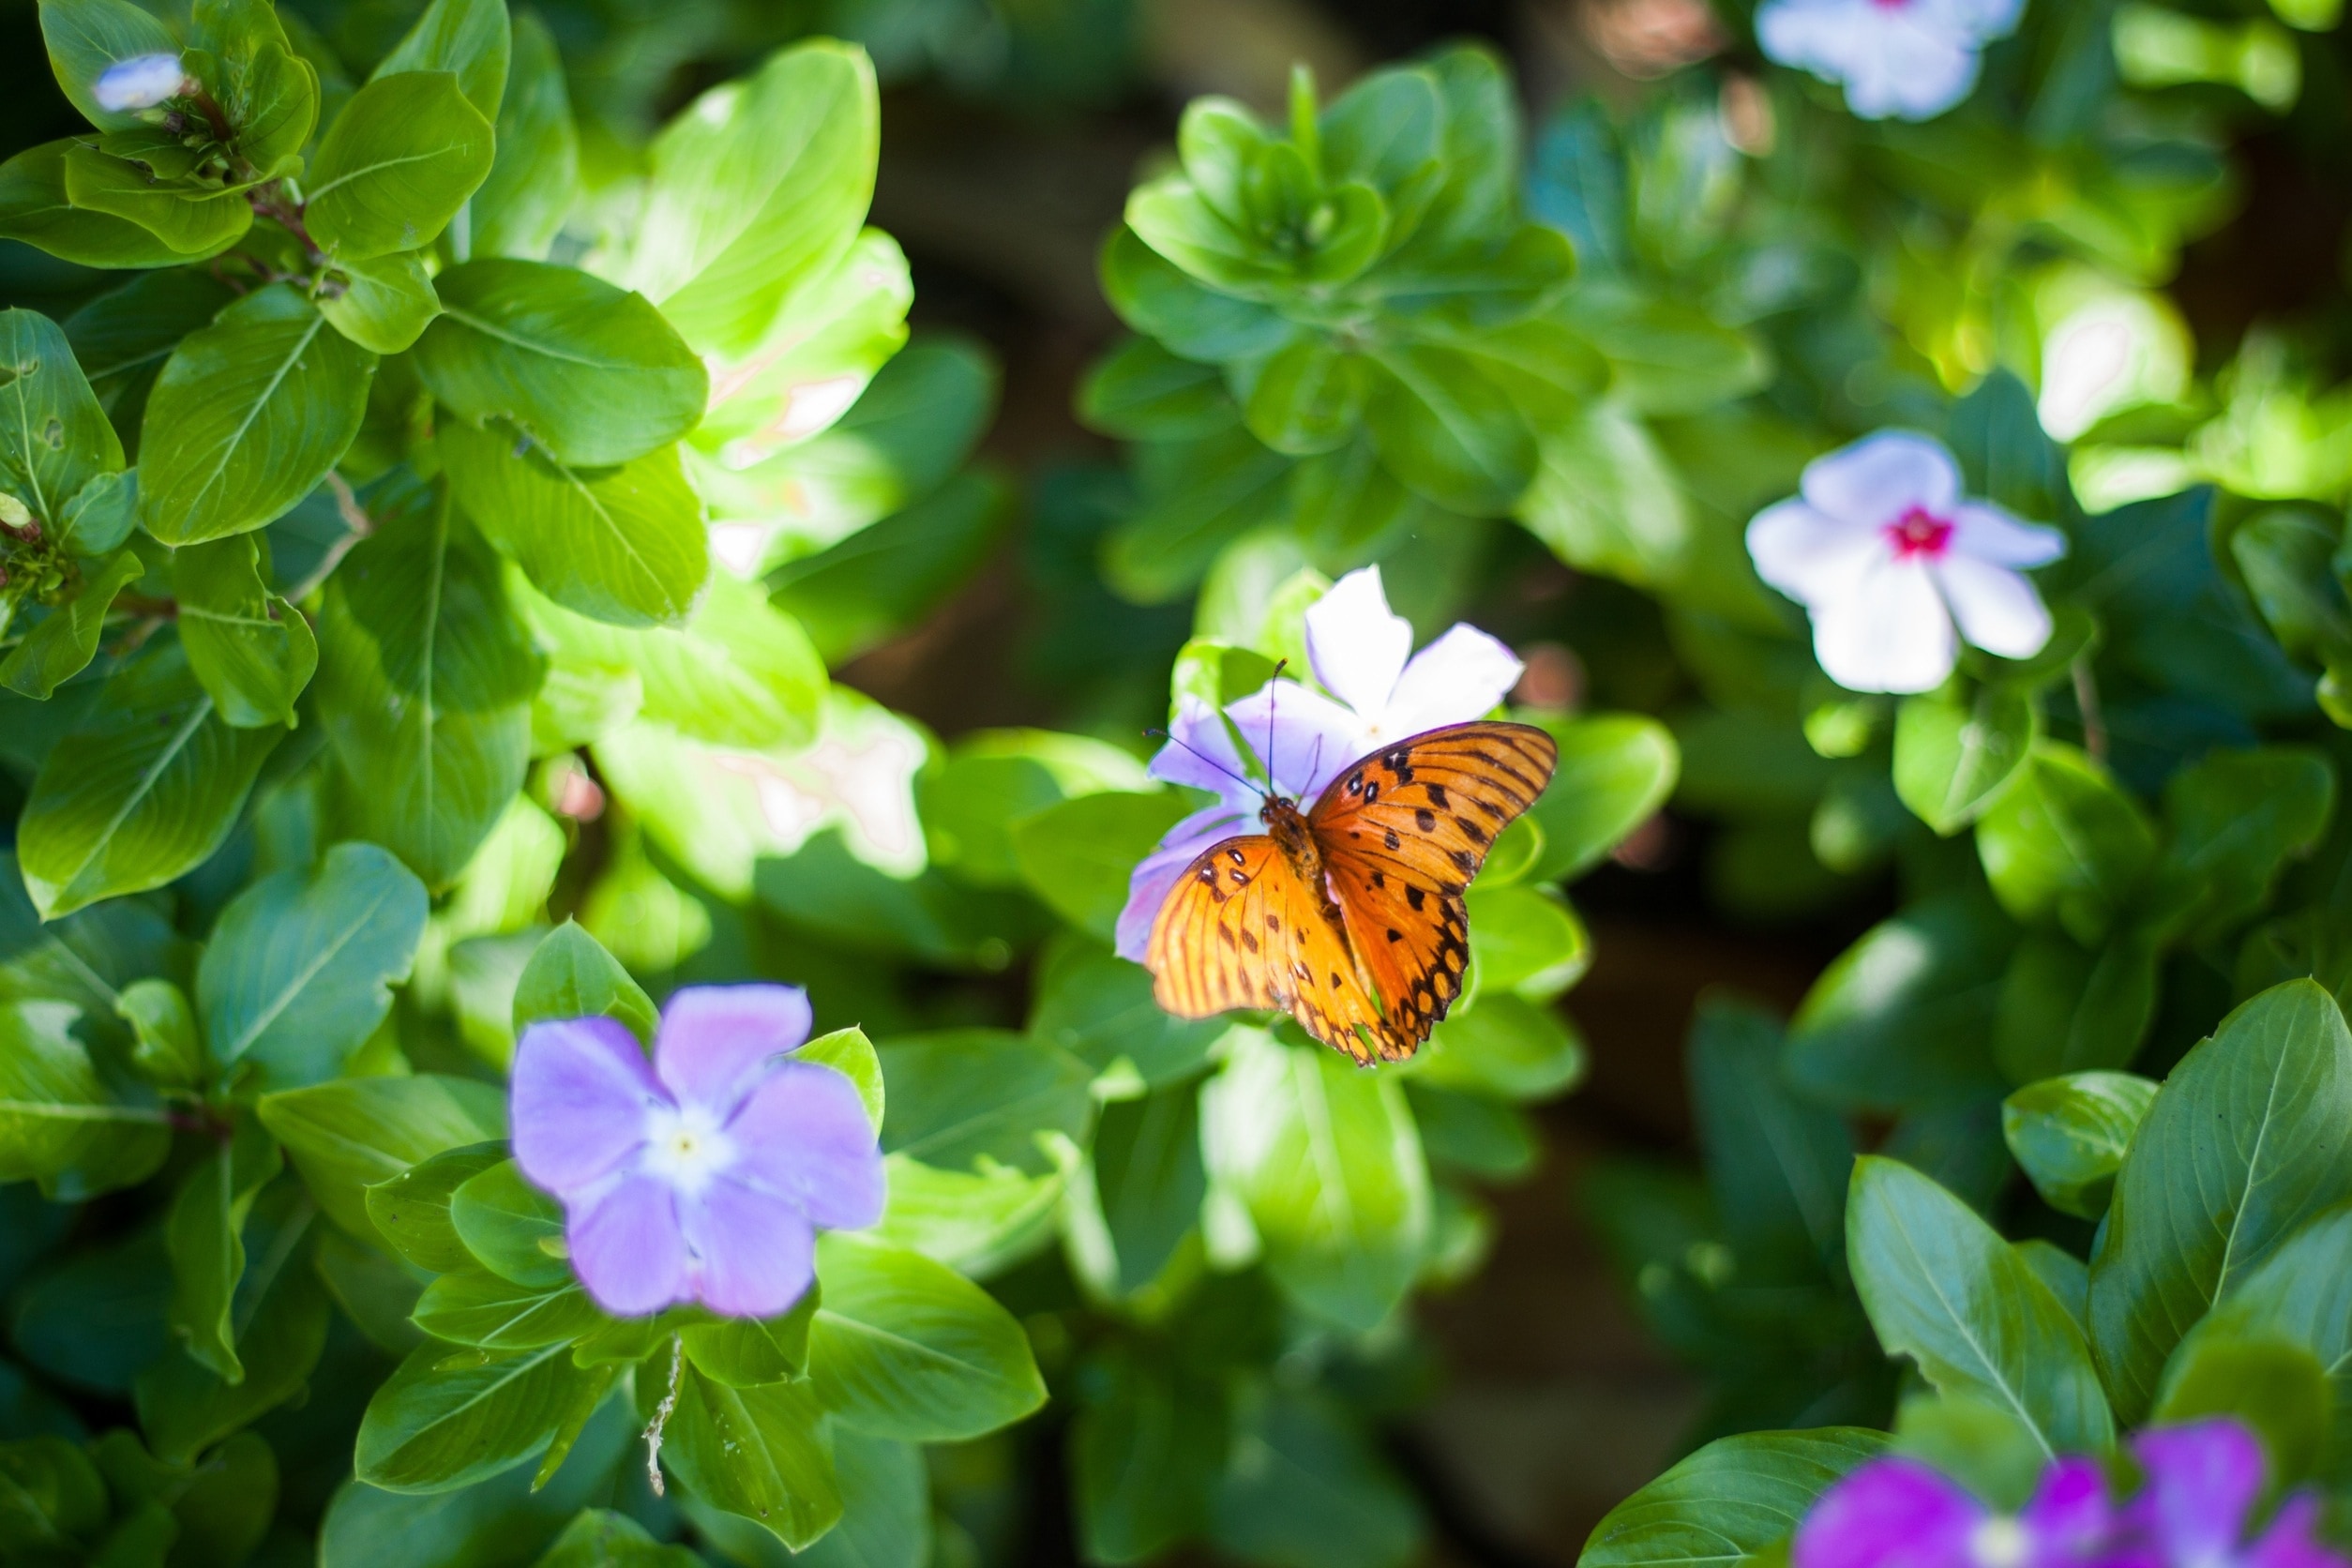 gulf fritillary butterfly on purple flowers during daytime